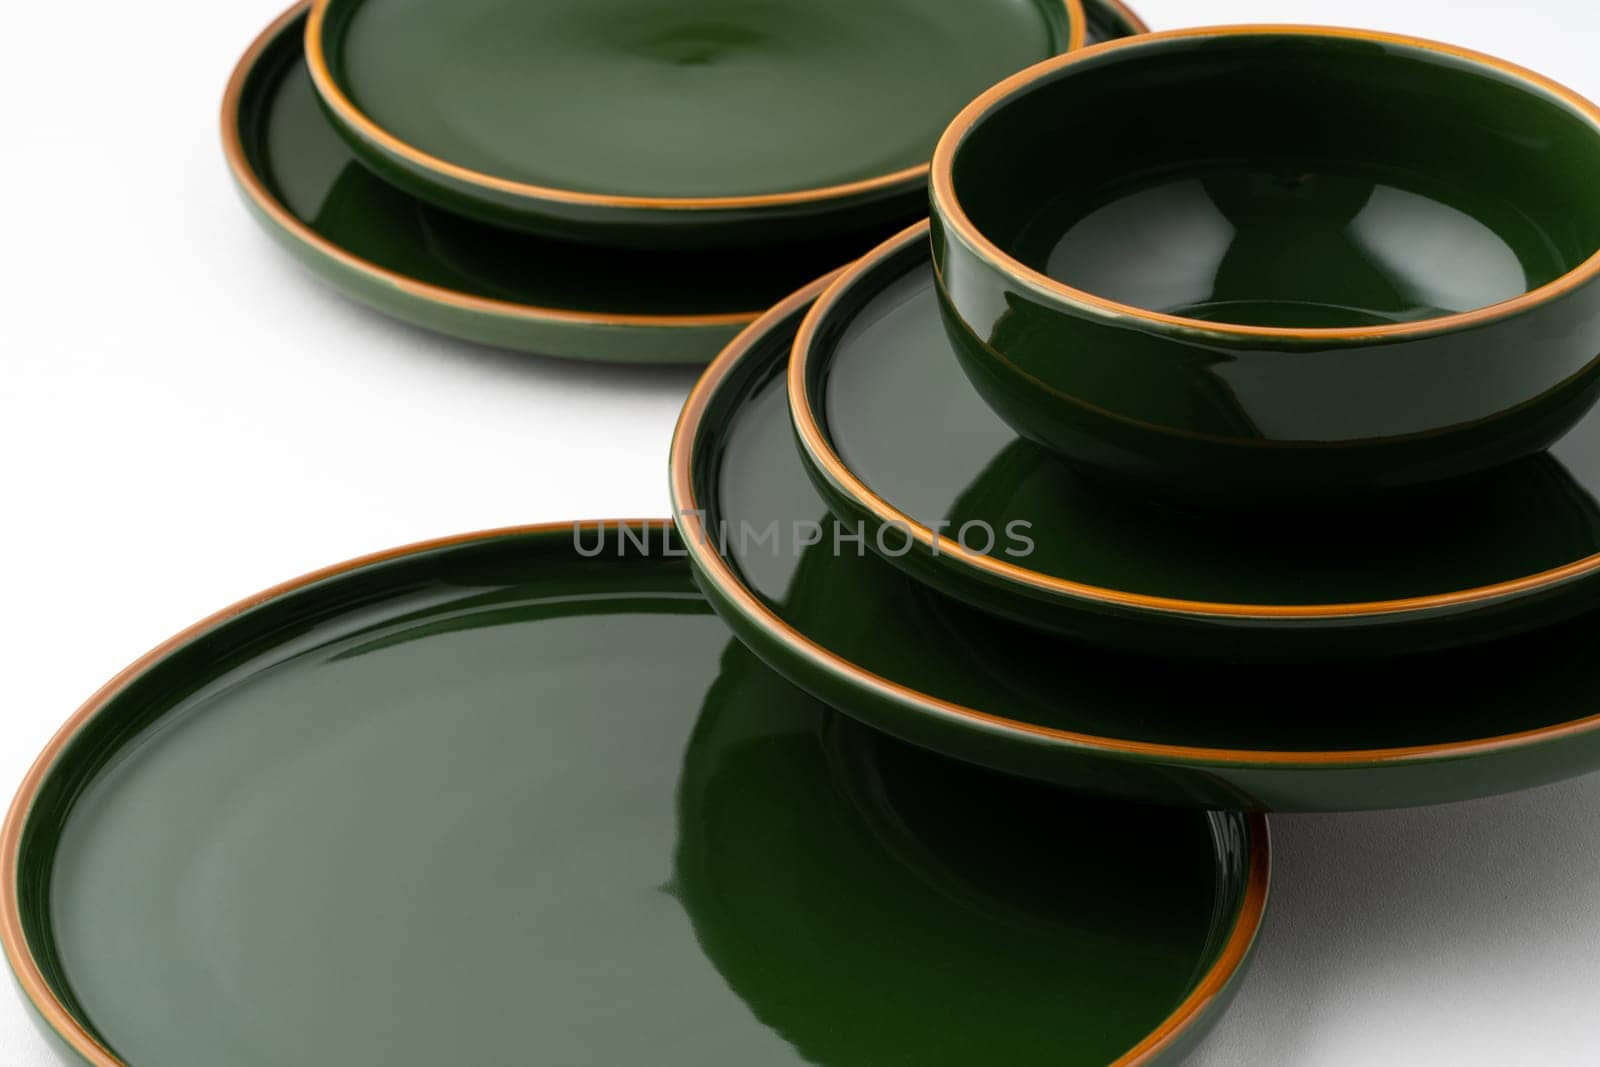 A set of green ceramic plates and bowl on a white background